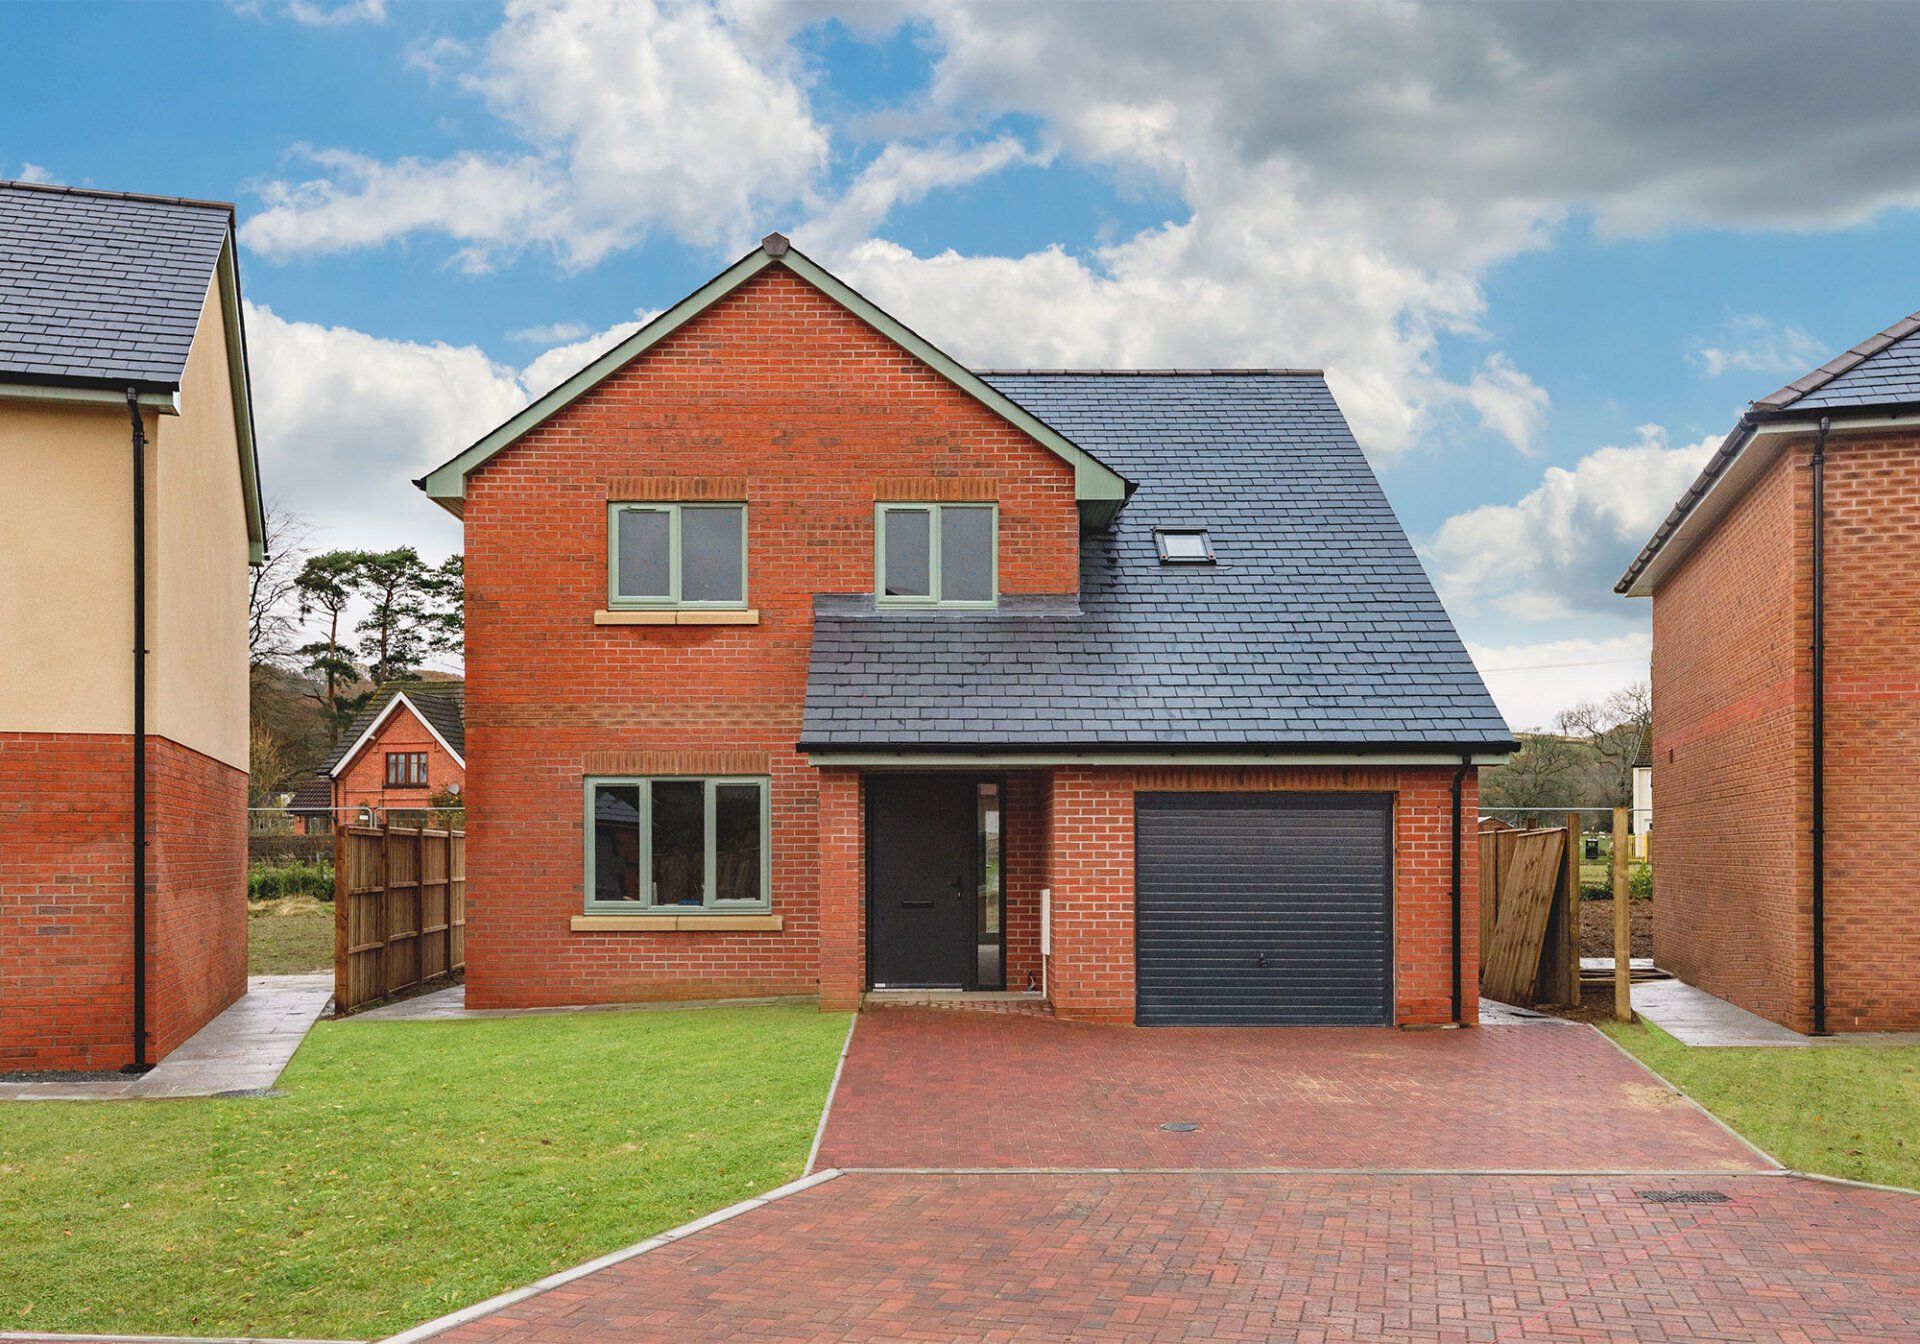 Llandovery (plot 2), a three-bed detached property with integral garage.